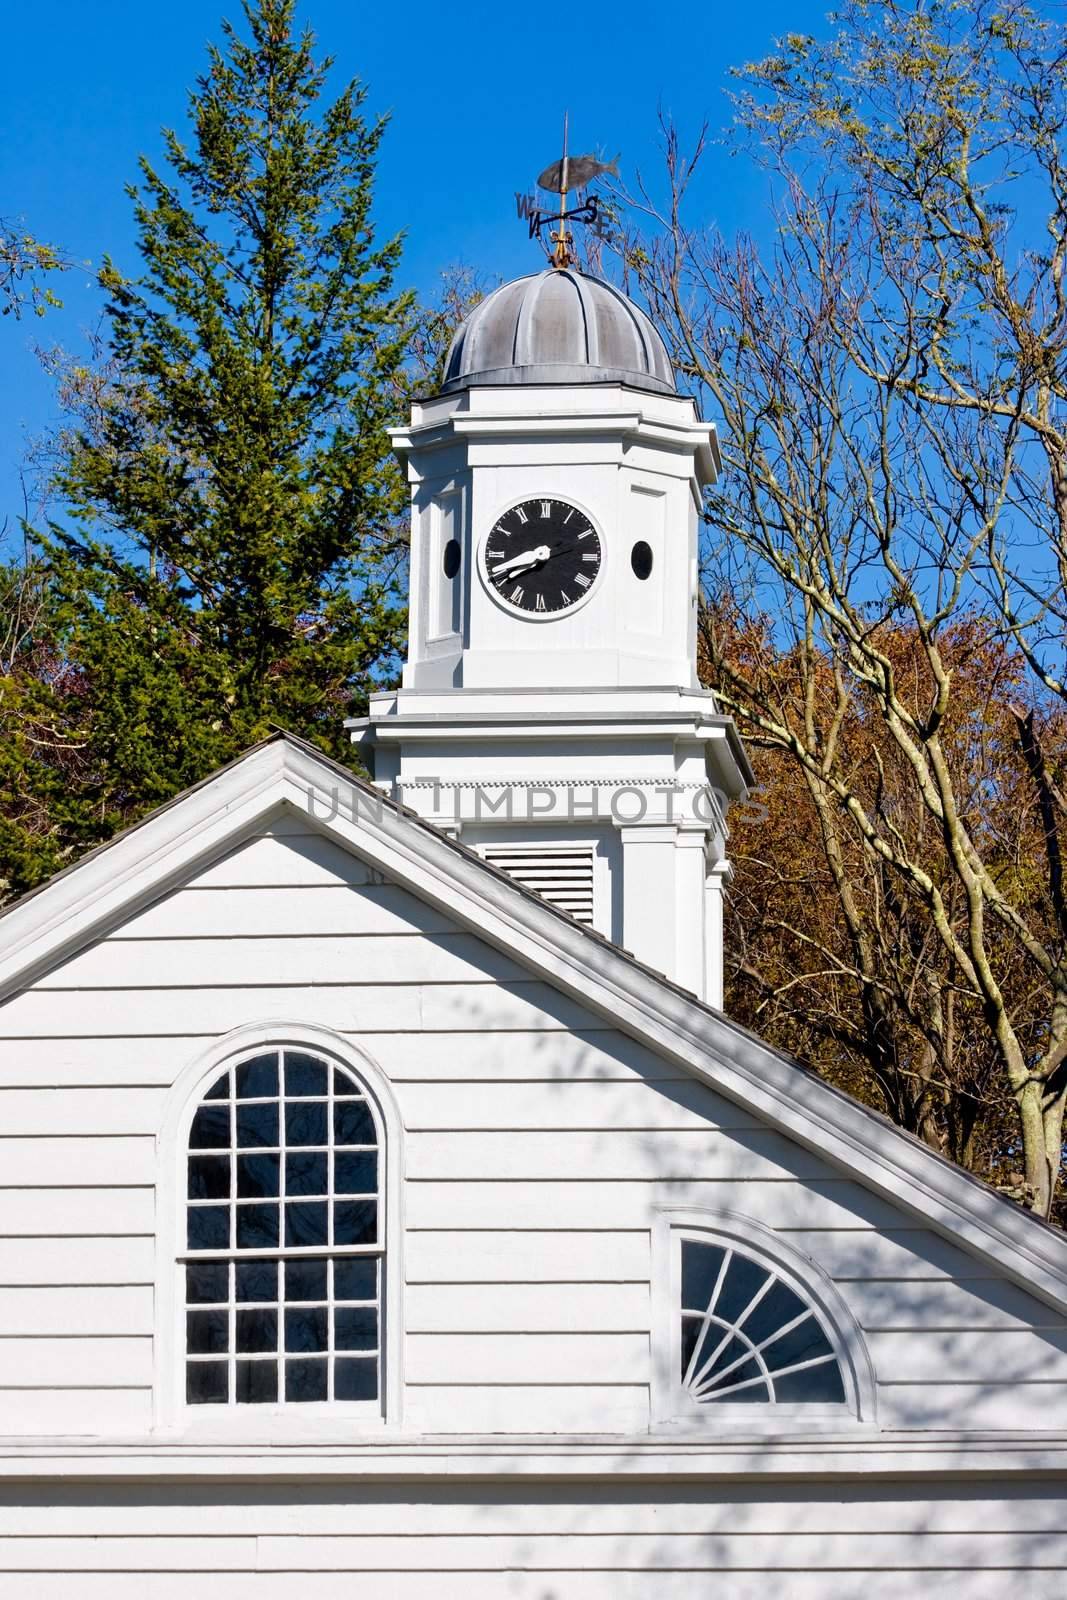 An old, restored church in Allaire Village, New Jersey. Allaire village was a bog iron industry town in New Jersey during the early 19th century.